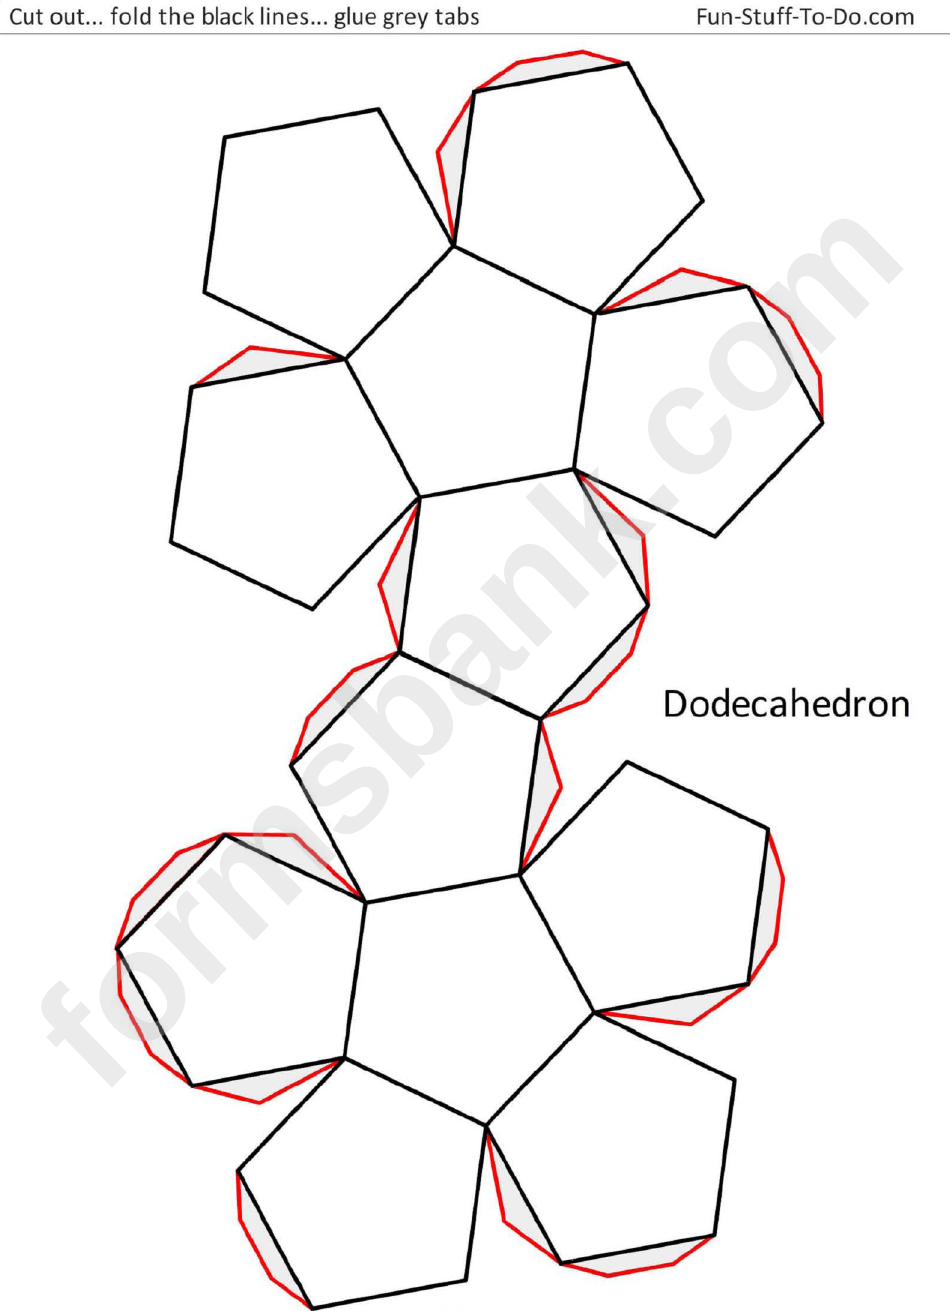 Dodecahedron Templates printable pdf download